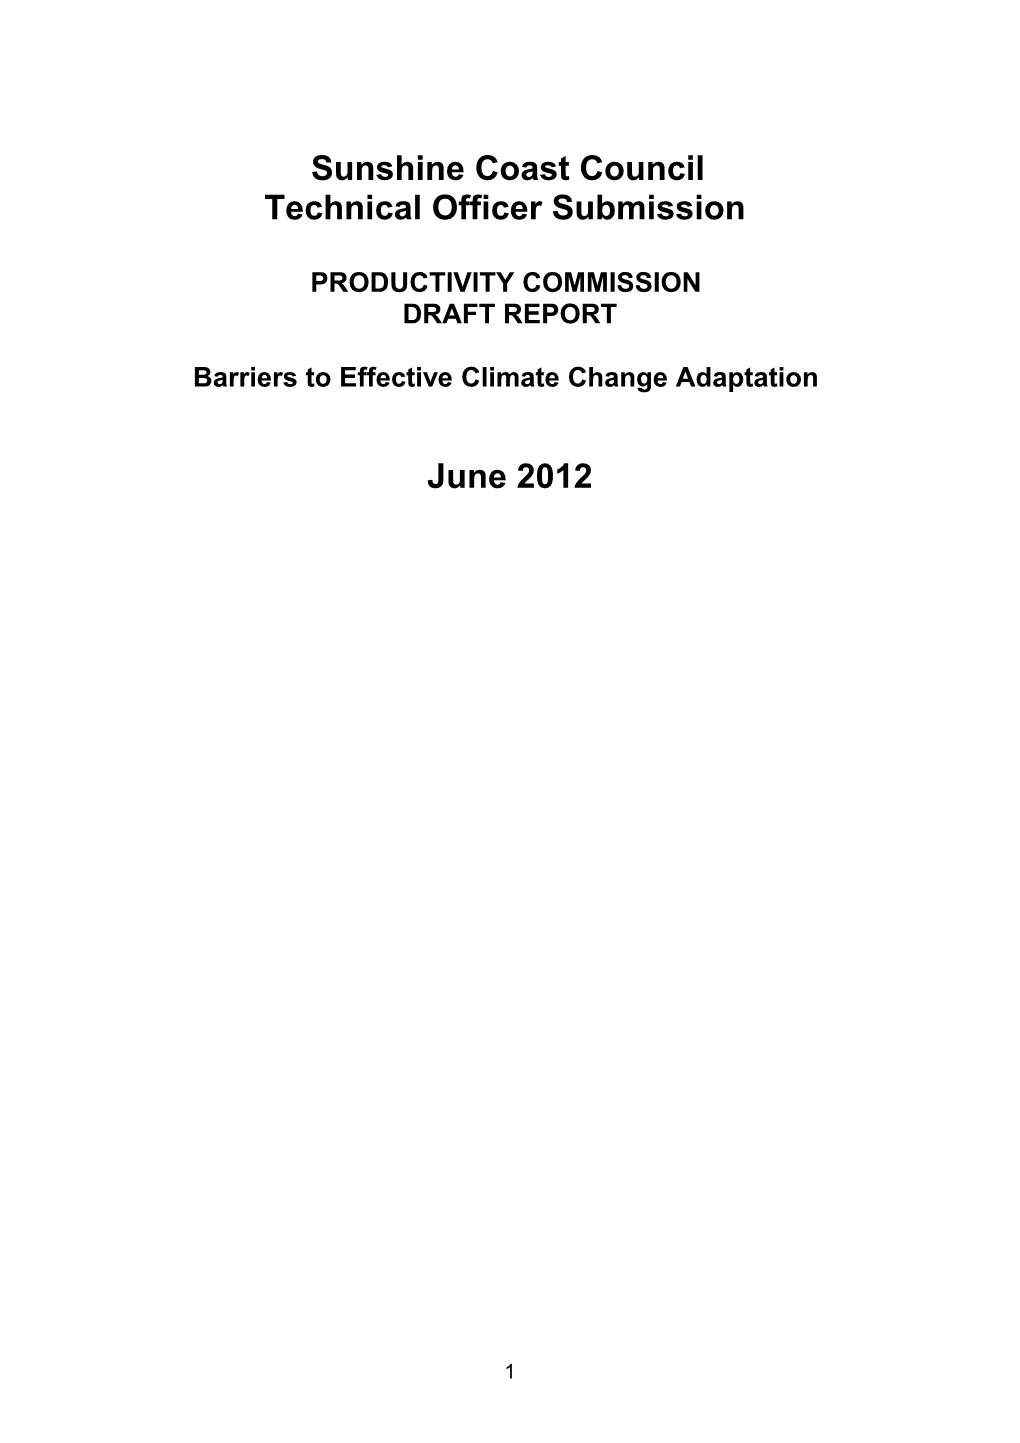 Submission DR149 - Sunshine Coast Council - Barriers to Effective Climate Change Adaptation